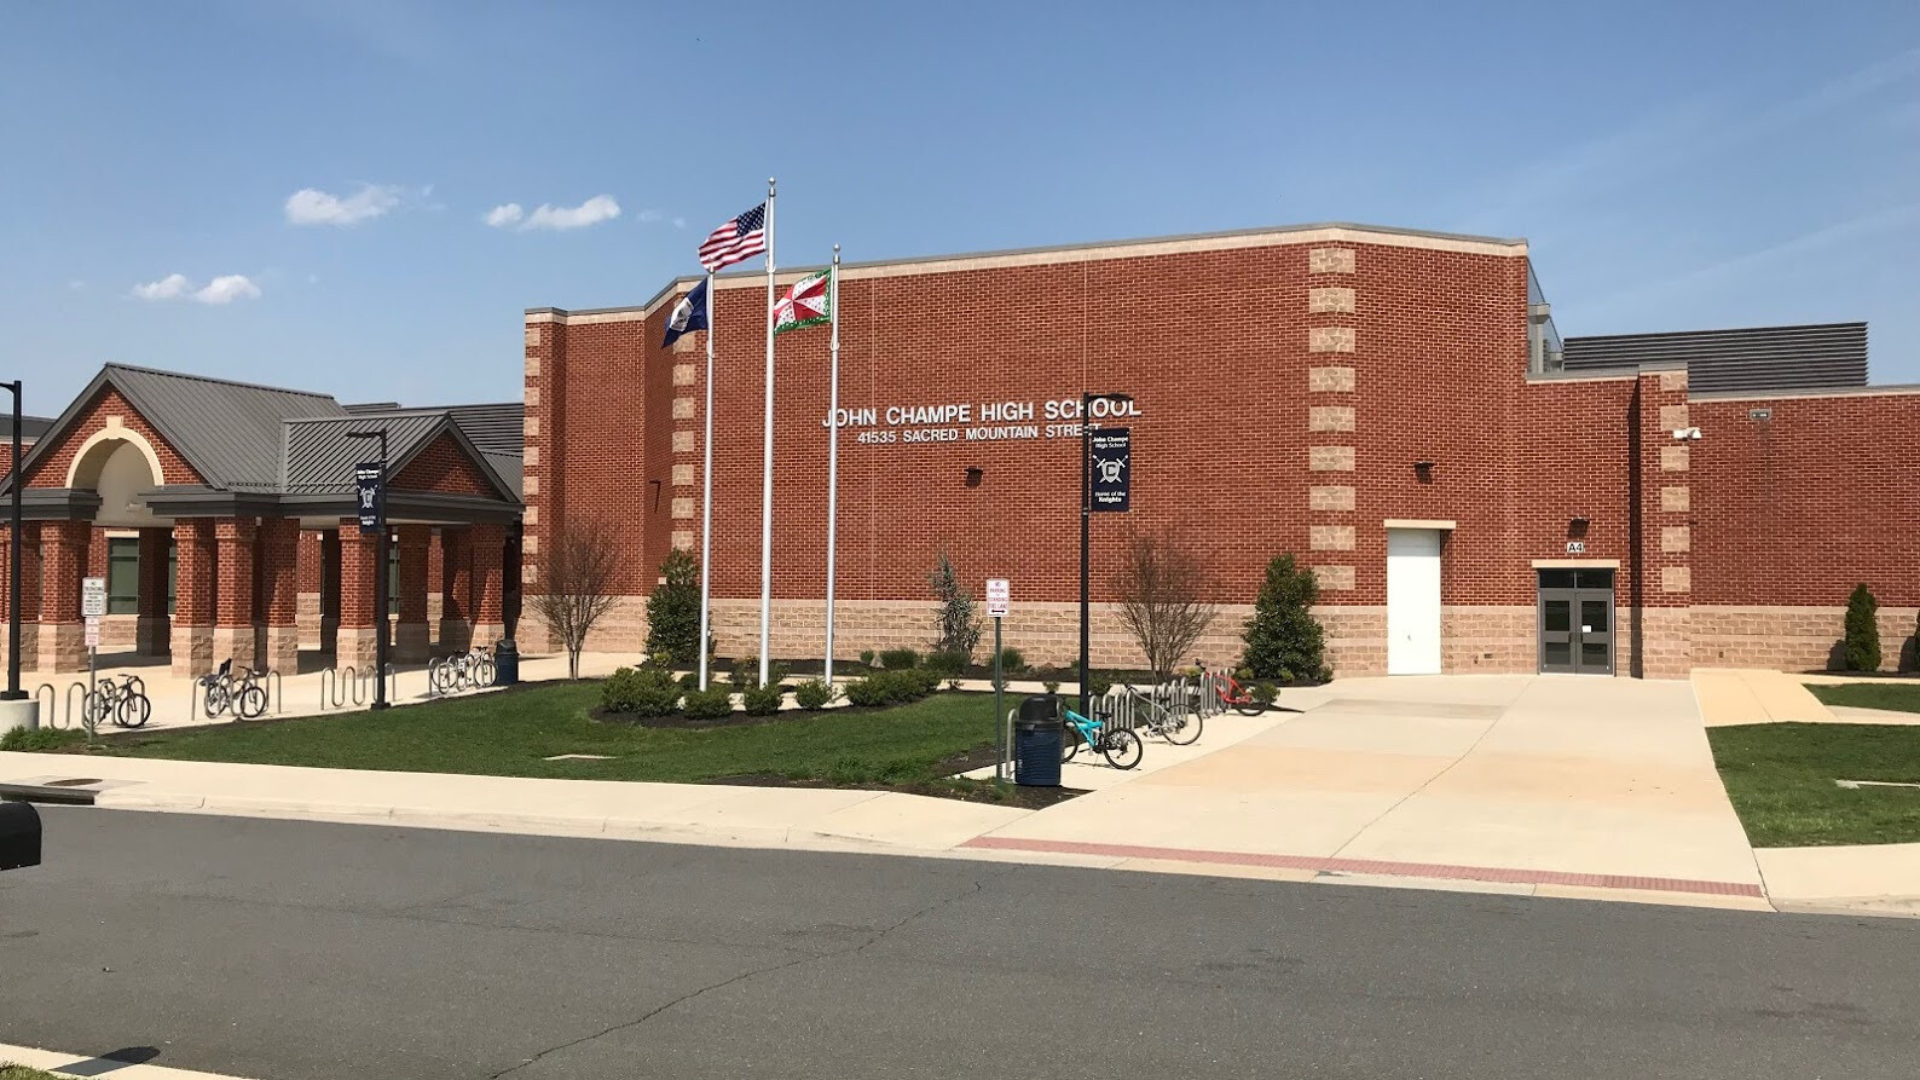 Photograph of the front of the John Champe High School building.